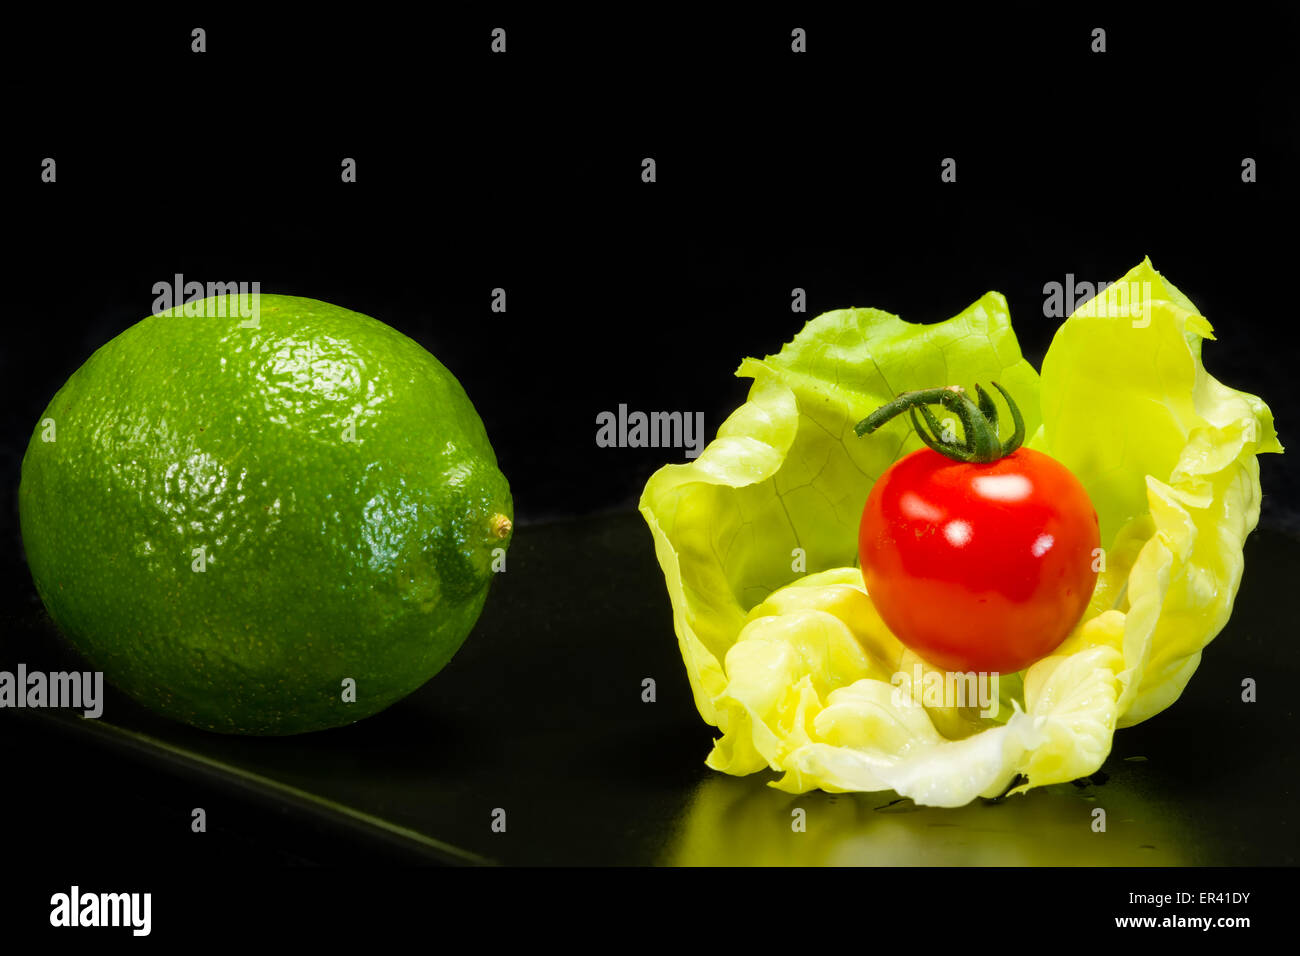 Lettuce, lime and tomato on a black background Stock Photo